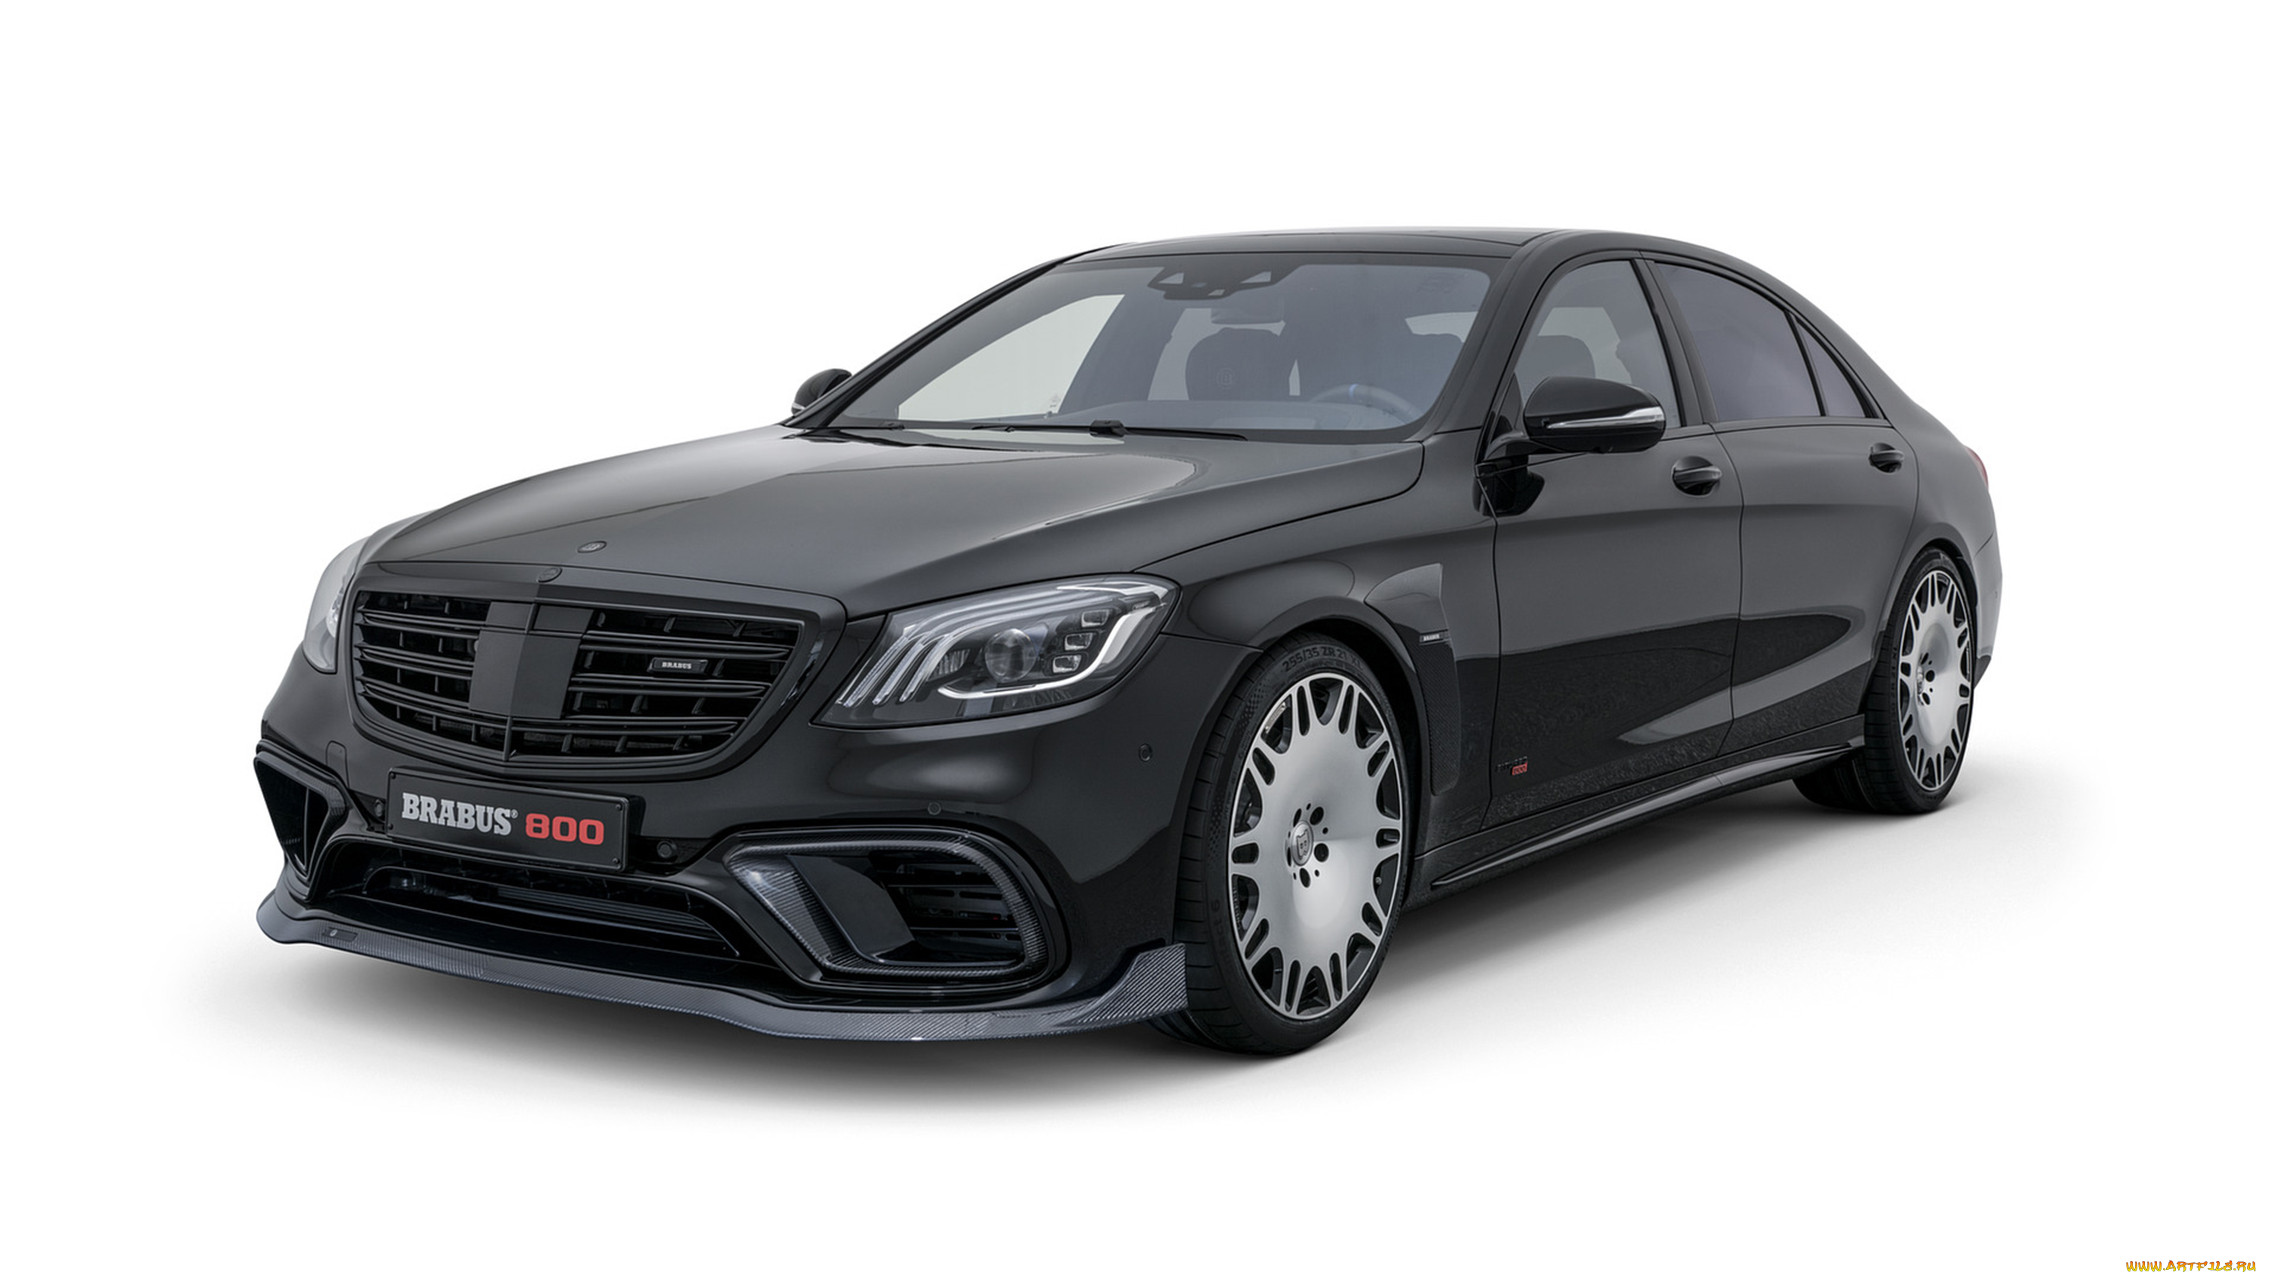 brabus 800 based on mercedes-benz amg s-63 4matic  2018, , brabus, 2018, s-63, 4matic, amg, mercedes-benz, based, 800